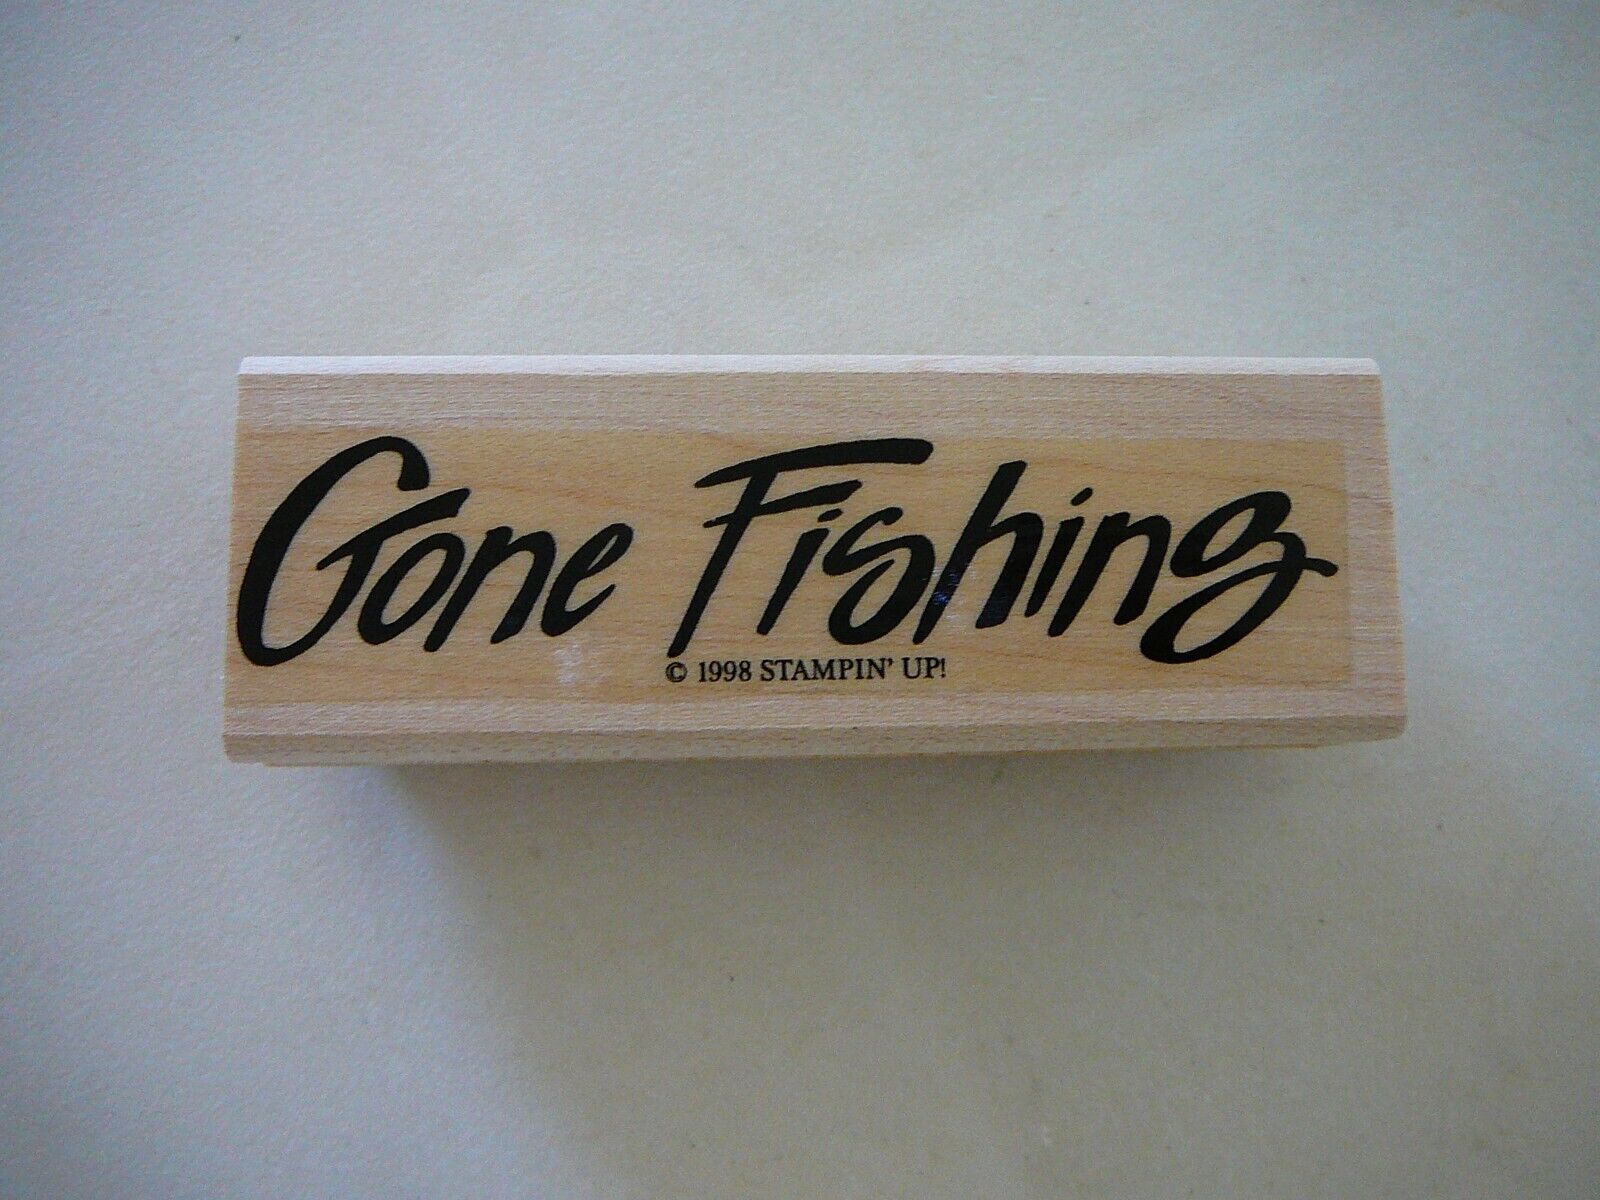 "Gone Fishing" Stampin' Up! 1998 Rubber Stamp